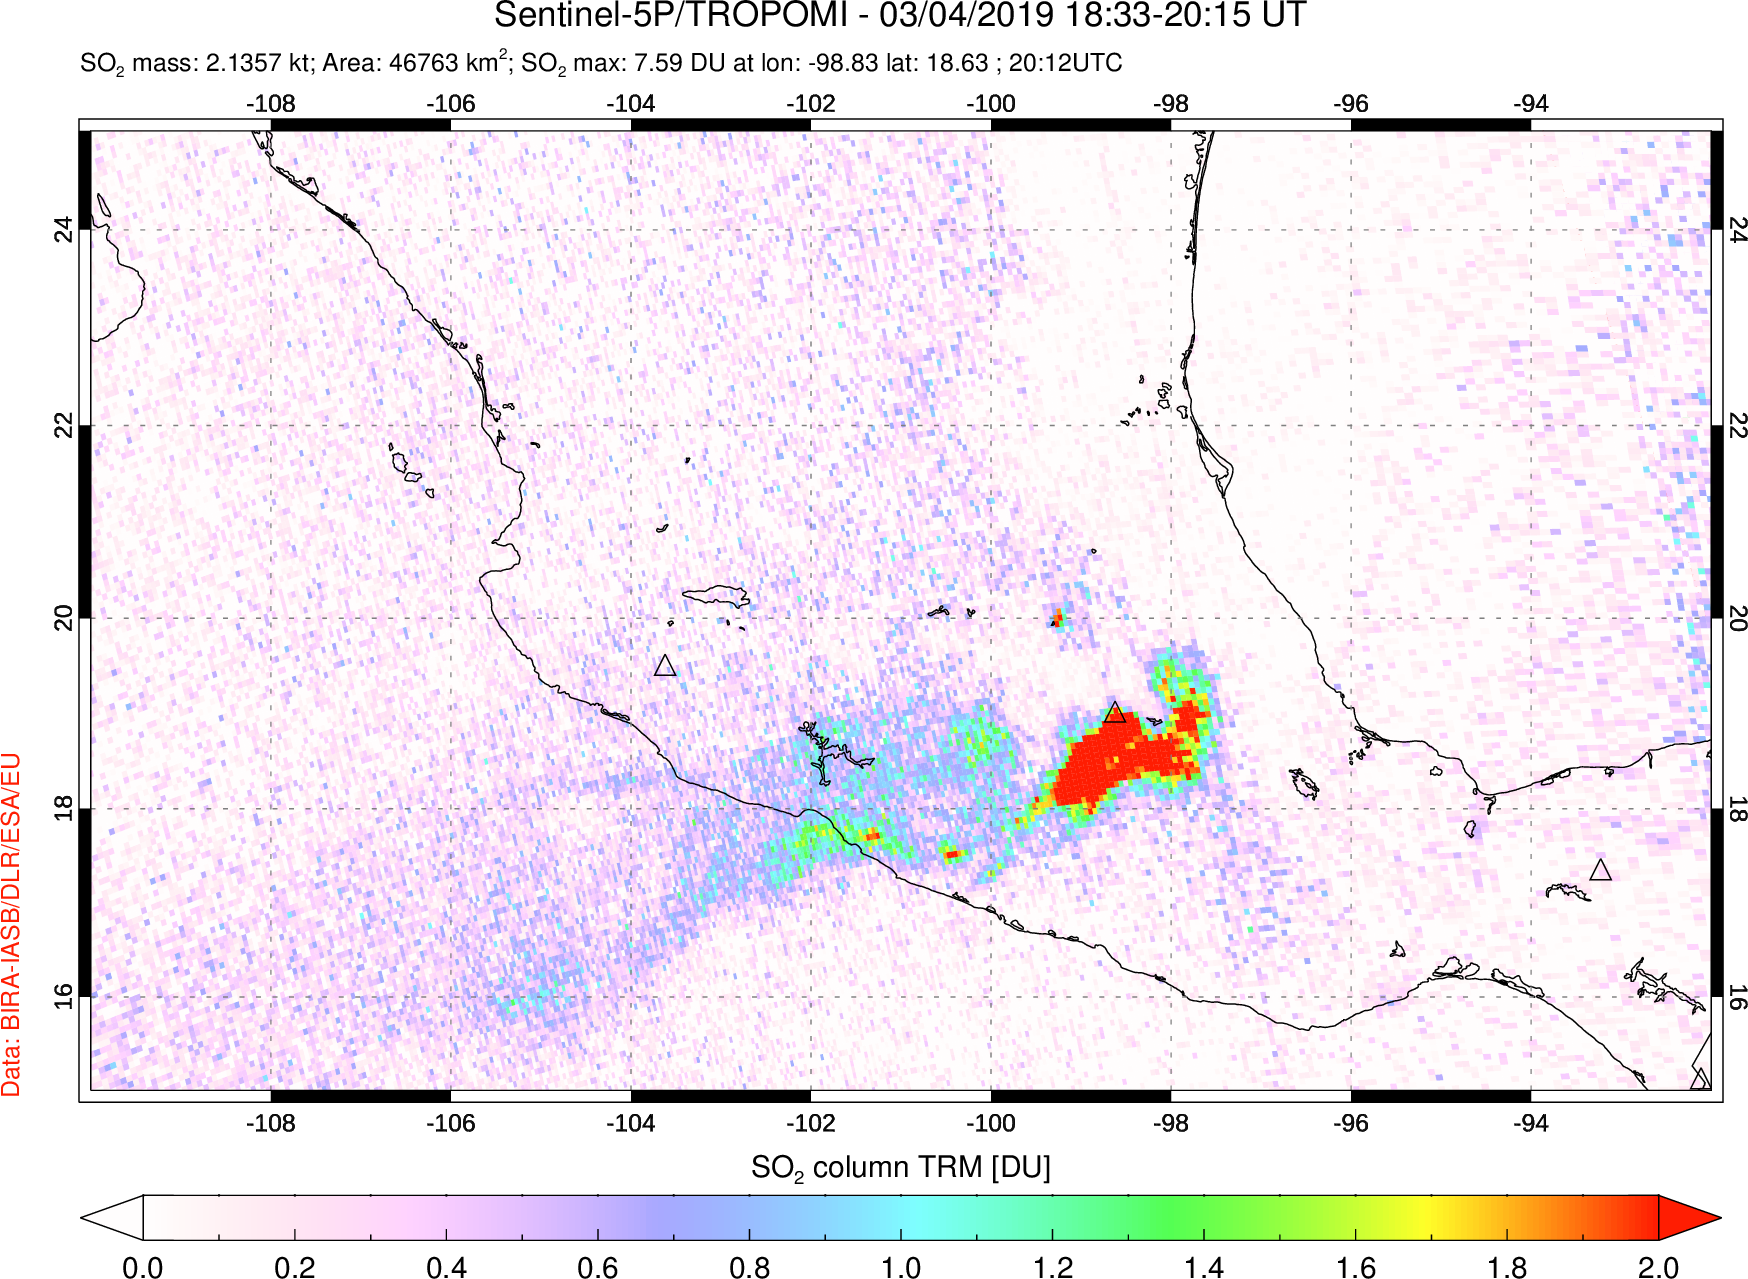 A sulfur dioxide image over Mexico on Mar 04, 2019.